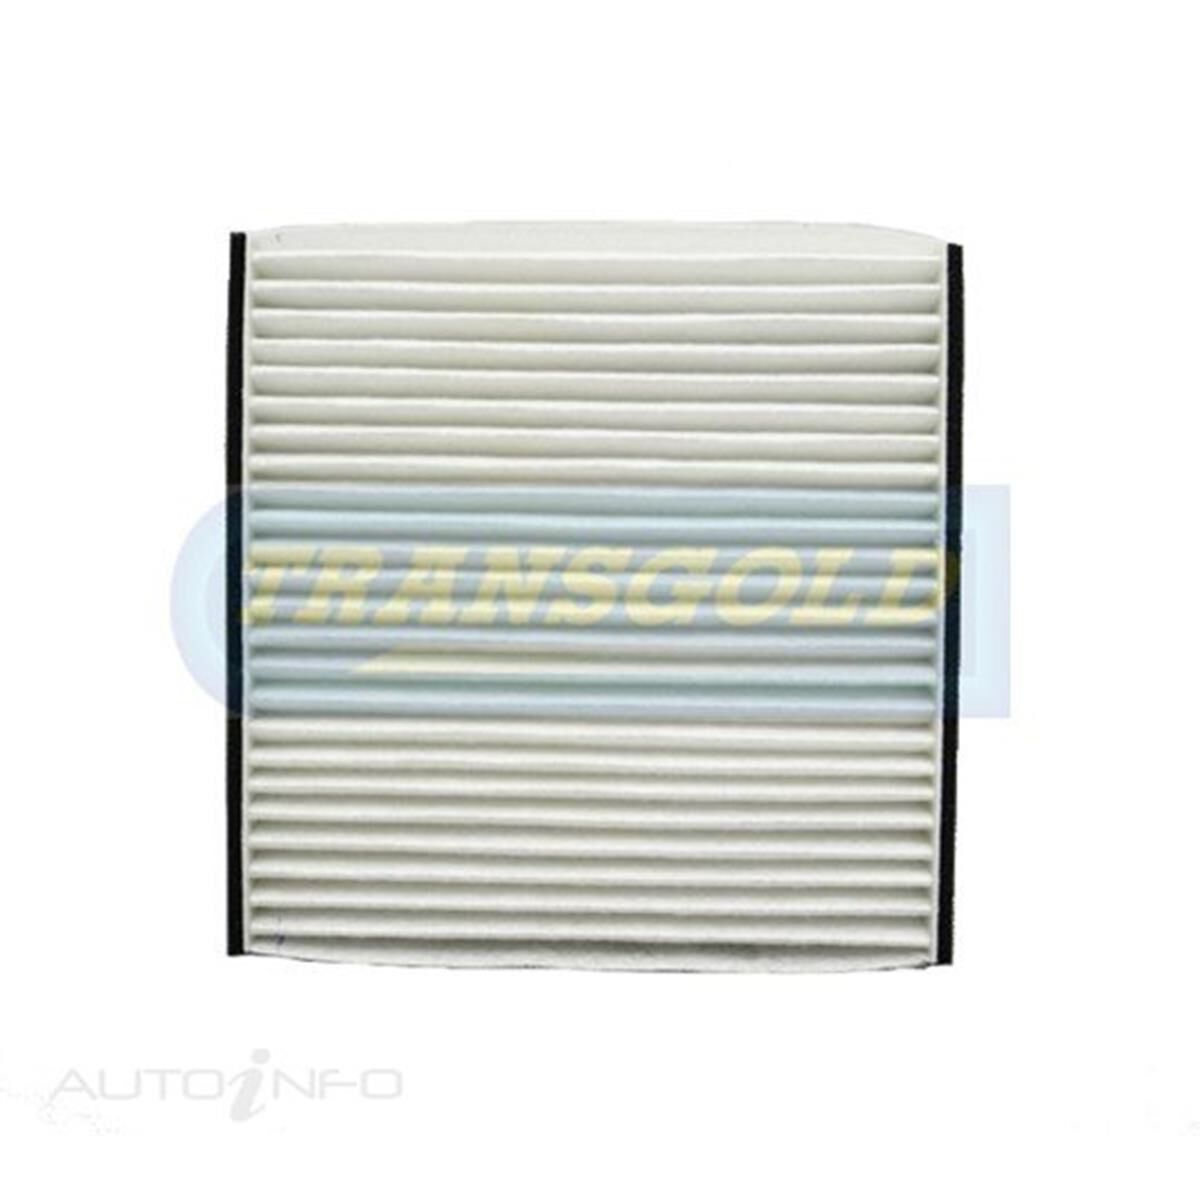 For NISSAN Cabin Air Filter New Murano Altima Pathfinder Great Fit!